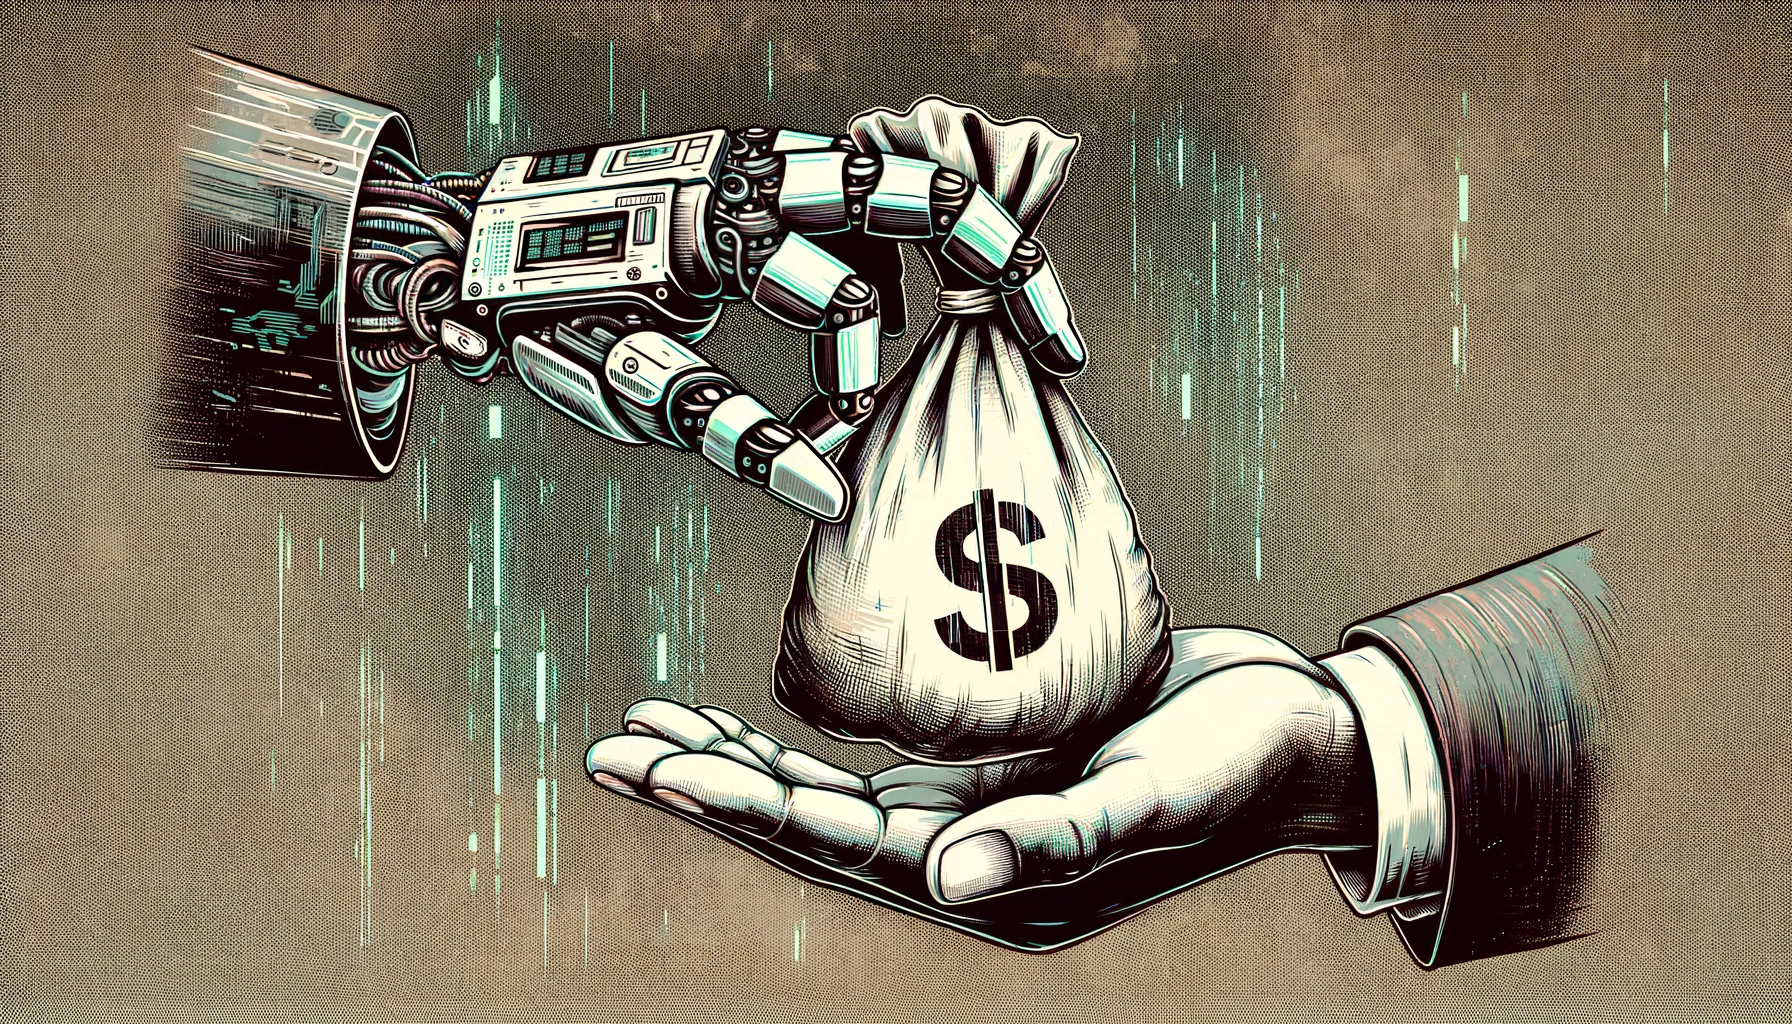 A hand-drawn editorial illustration in 16:9 aspect ratio, featuring a close-up view of a robot hand offering a bag of money to a human hand, enhanced with a glitch art style. The robot hand is sleek, metallic, and futuristic, with visible glitch effects like digital distortion and pixelation. The human hand appears realistic, reaching out to accept the old-fashioned money bag, which has a prominent dollar sign, symbolizing a secretive financial exchange. The background is subtly infused with digital glitches to complement the futuristic and mysterious vibe of the scene.